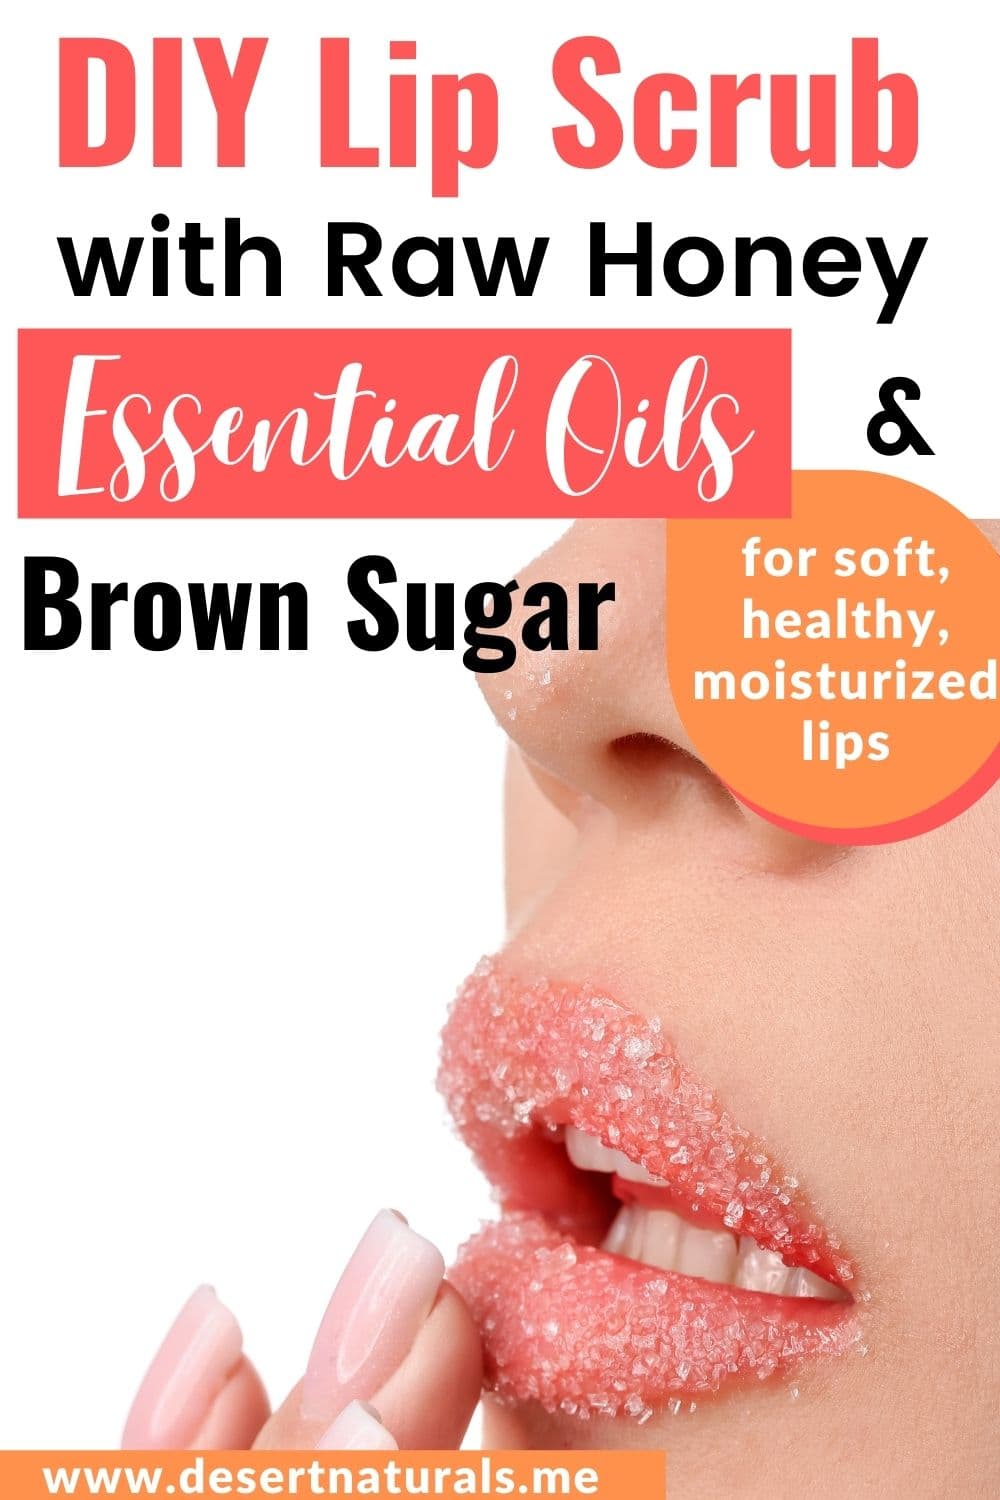 woman's lips with diy essential oil sugar scrub on them and text